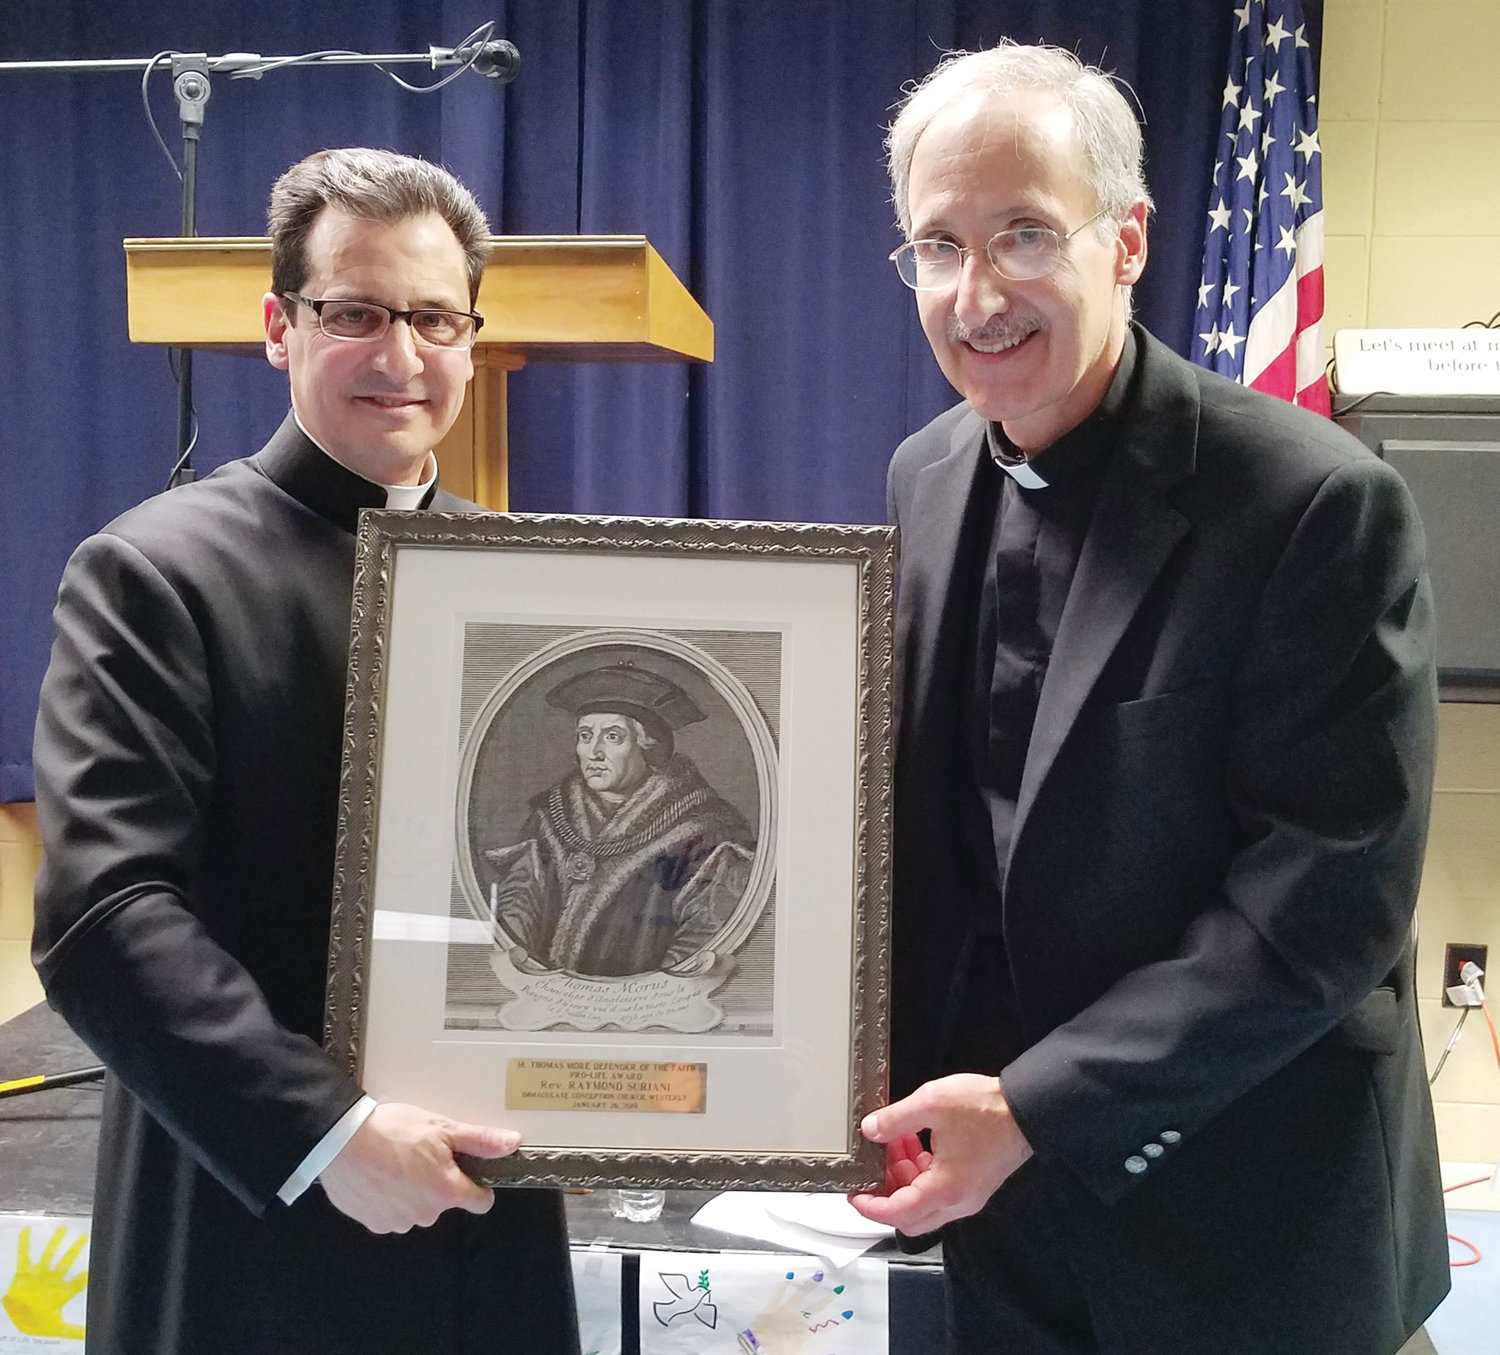 Father Giacomo Capoverdi, left, pastor of Immaculate Conception Church, presents Father Ray Suriani, pastor emeritus of St. Pius X Parish, the St. Thomas More Defender of the Faith Pro-Life award because of his commitment to pro-life issues for more than four decades.